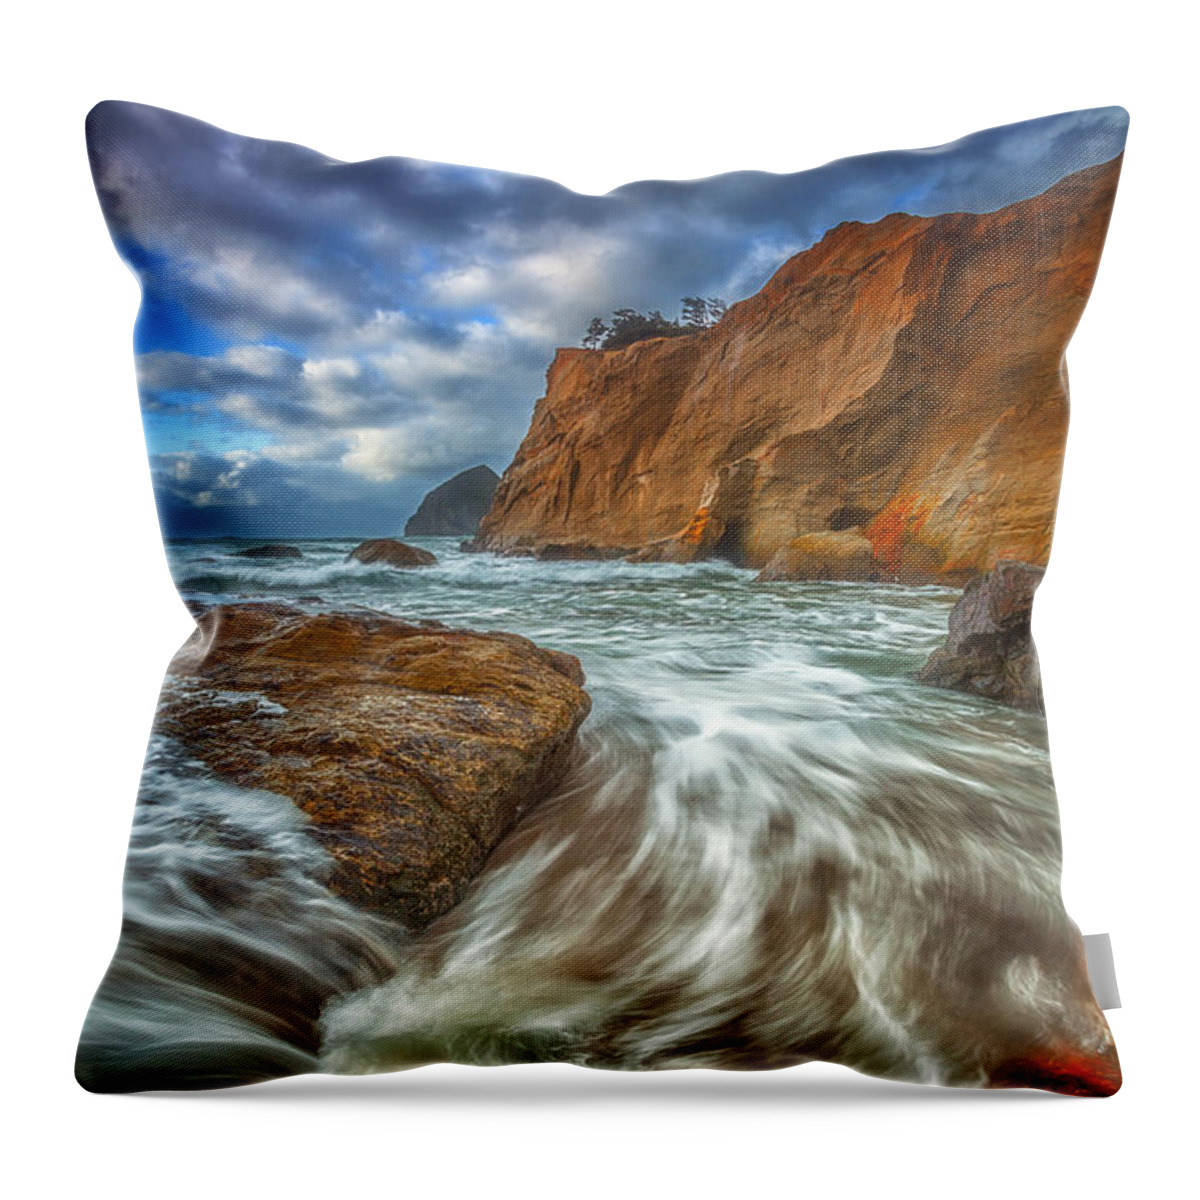 Oregon Throw Pillow featuring the photograph Sweeping Tides by Darren White